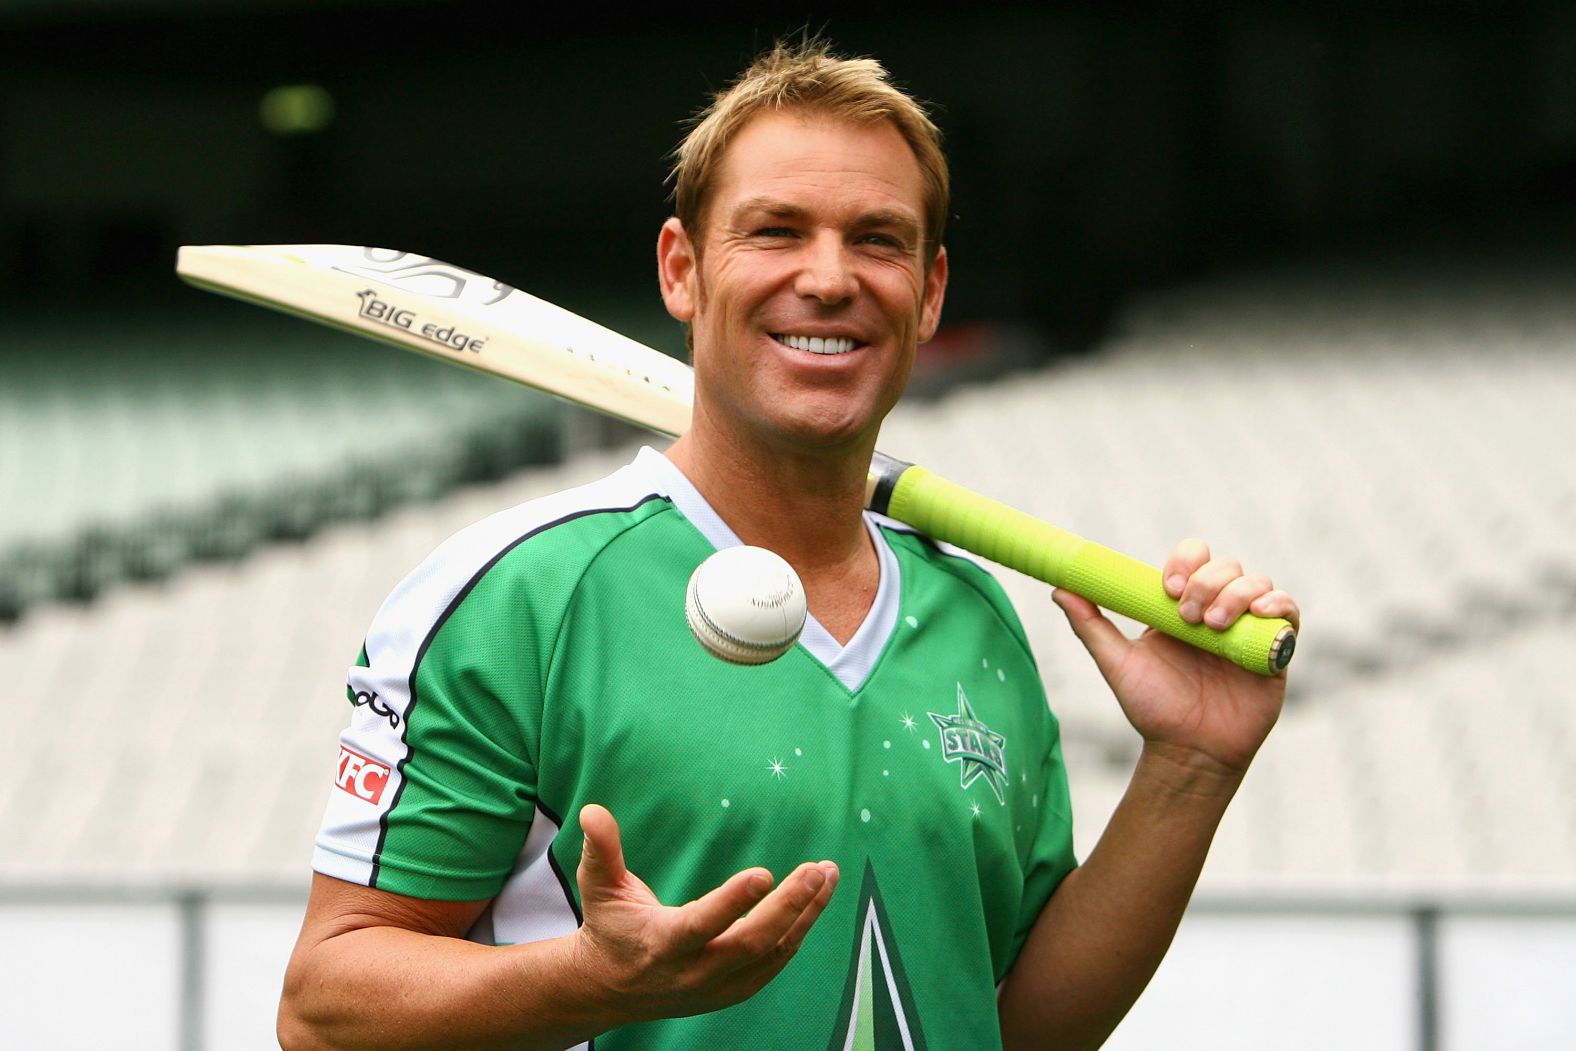 Australian cricketer <a href="index.php?page=&url=https%3A%2F%2Fwww.cnn.com%2F2022%2F03%2F04%2Fsport%2Fshane-warne-death-spt-intl%2Findex.html" target="_blank">Shane Warne,</a> widely considered one of the greatest players in the history of the sport, died March 4 at the age of 52, his management company confirmed to CNN. Warne was one of cricket's most lethal bowlers, with 708 Test wickets to his name. That's the most ever for an Australian and the second-most of all time.